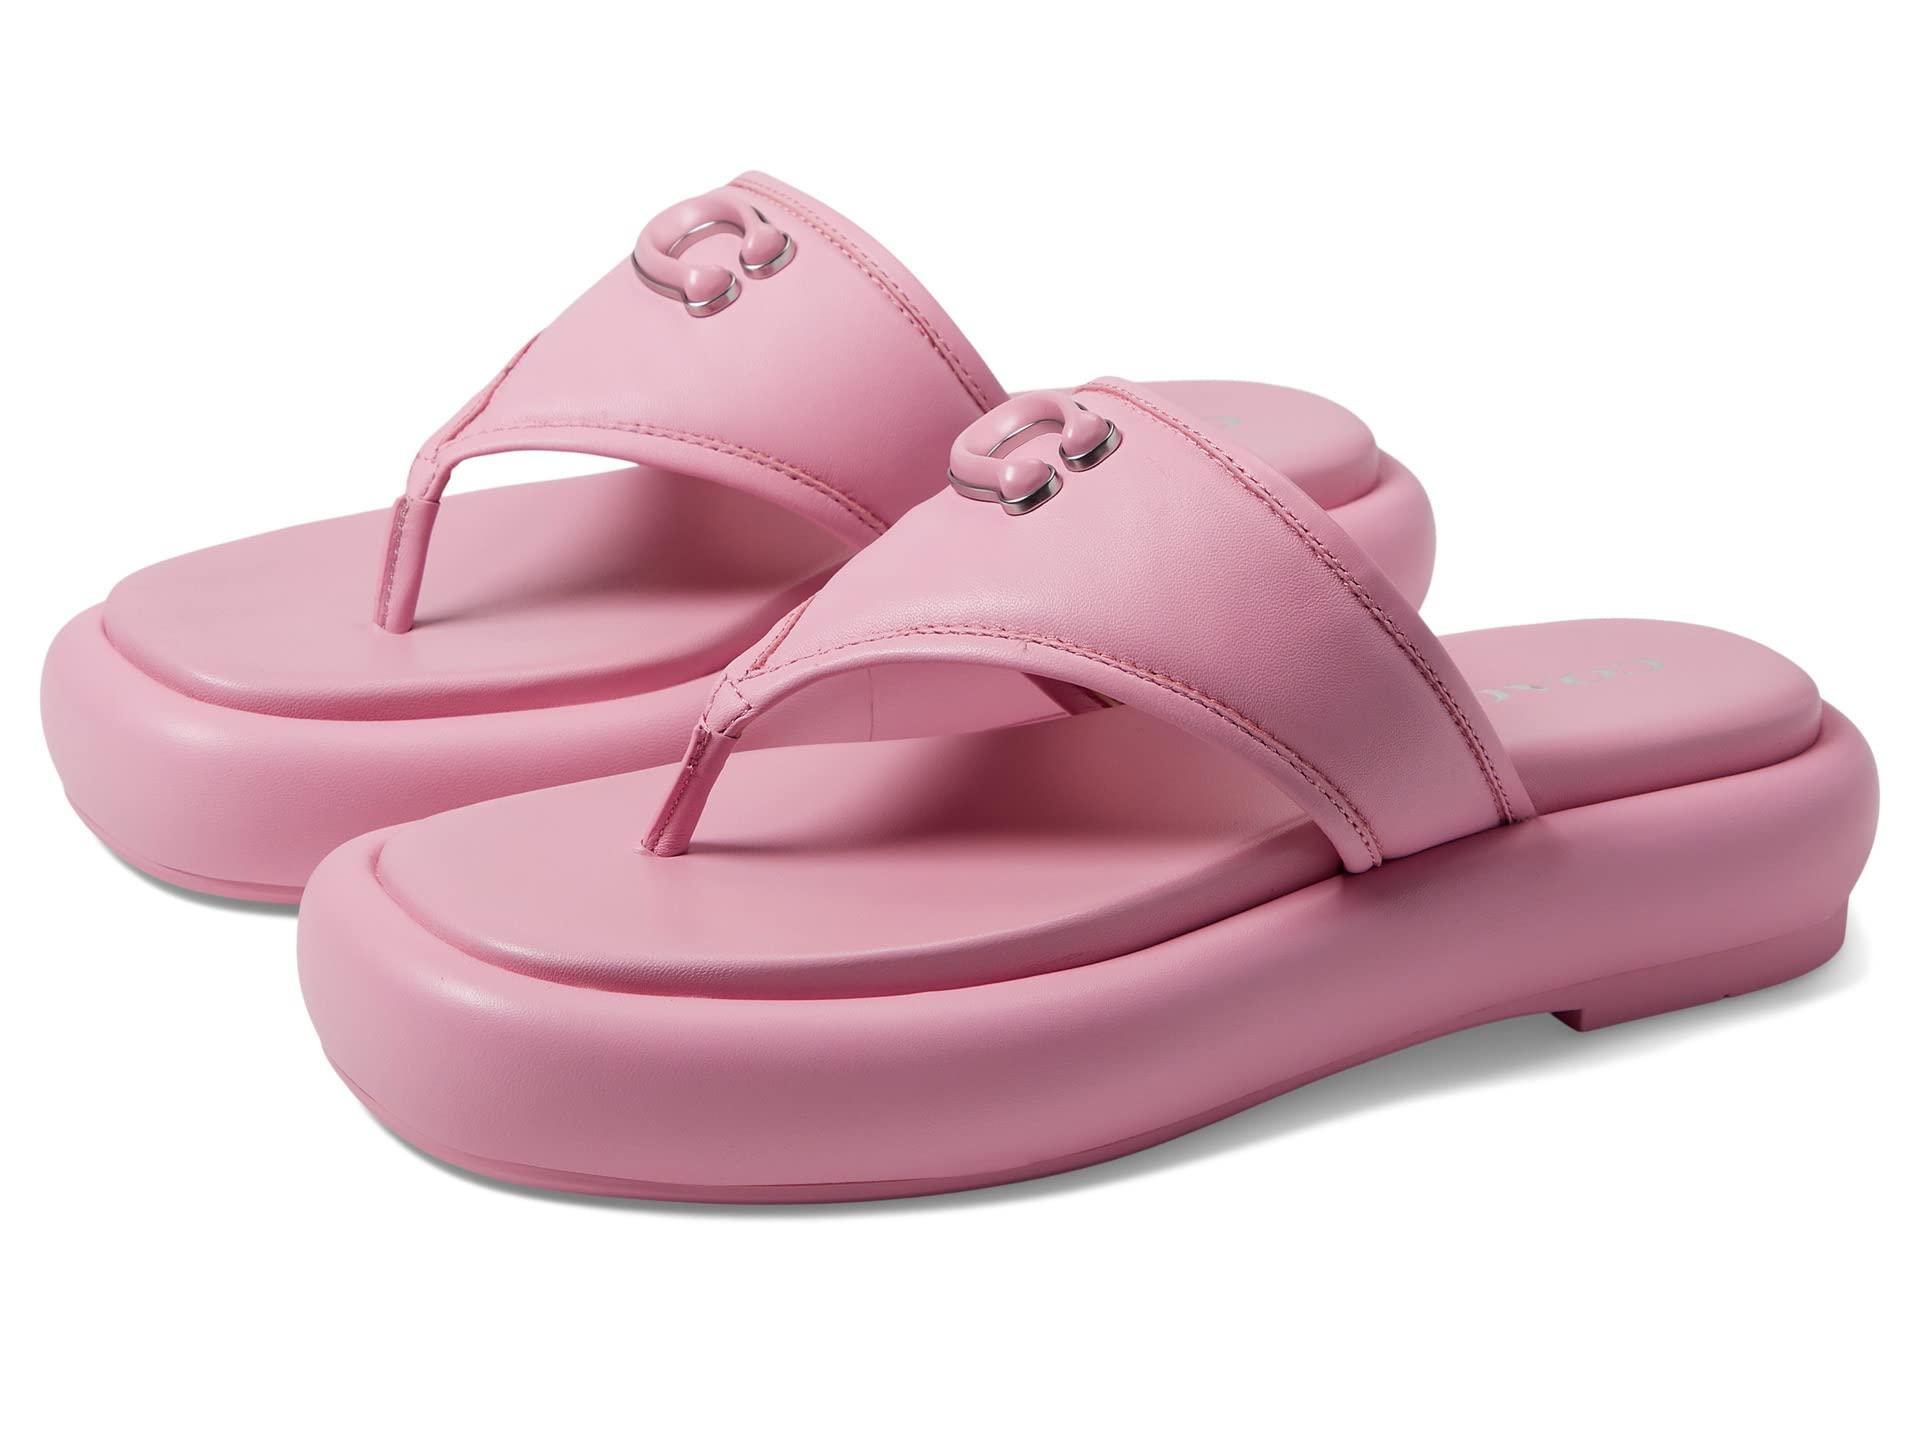 Leather sandal Louis Vuitton Pink size 37 EU in Leather - 35669505